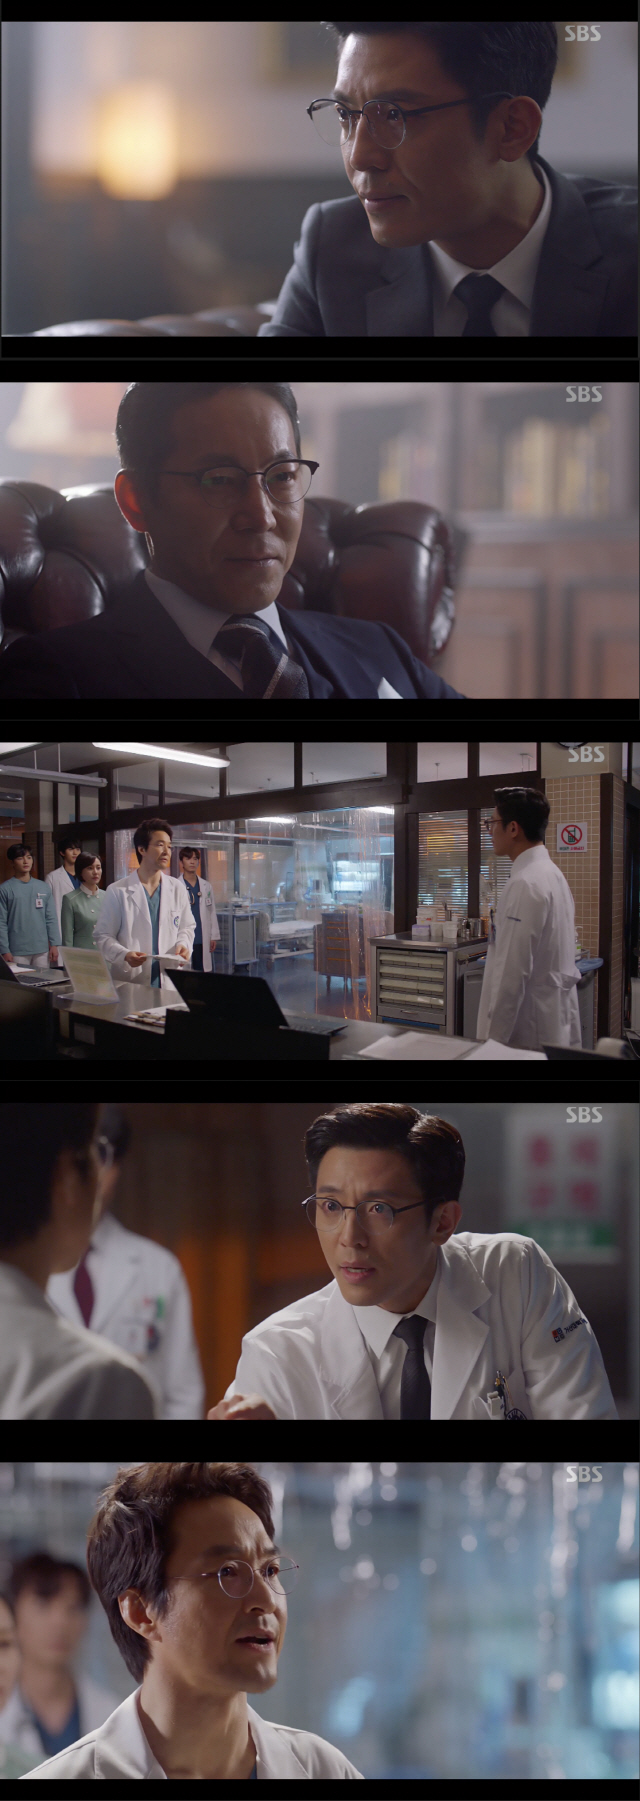 Kim Ju-Hun, a romantic doctor Kim Sabu 2, gave a breathtaking tension with his eyes.In the 7th episode of SBS Monthly Drama Romantic Doctor Kim Sabu 2 (playplay by Kang Eun-kyung, director Yoo In-sik, and production by Samhwa Networks), which was broadcast on the 27th, Kim Ju-Hun disassembled as the new director of Doldam, Park Min-guk, and formed a full-scale confrontation with Kim Sabu (Han Suk-kyu).Also, Park Min-guk heard that Cha Eun-jae (Lee Sung-kyung) was stabbed in the neck while confronting his wife who was domestically violent by her husband.Park Min-guk asked Kim Sabu to apologize to her husband first and to dismiss the case.When Kim Sabu opposed his opinion, he provoked Kim Sabu with overwhelming charisma, saying, If you do not want to play the role of a surgeon properly, you can put it out.In the latter half of the play, Park Min-guk was informed that a Weapon number patient transport vehicle with terminal renal failure was coming toward the stone wall.He then rejected Weapon number patients for the safety pursuit of Hospital and for other patients to feel threatened.When Kim Sa-bu responded, Park Min-guk said, You want a thrill, but I dont want to, and I want to make this Hospital safer and more stable.In this process, Kim Ju-Hun showed his firm belief with his decisive eyes and fought against Kim Sabu with his charisma.Kim Ju-Hun, who has been in full swing to spark conflicts with Kim Sabu, is raising the immersion of viewers by creating extreme tension through the character Park Min-guk.Meanwhile, SBS New Moonwha Drama Romantic Doctor Kim Sabu 2, starring Kim Ju-Hun, Han Suk-kyu, Lee Sung-kyung, and Ahn Hyo-seop, is a story about a real doctor set in the humble local stone wall, which is broadcast every Monday and Tuesday at 9:40 pm.